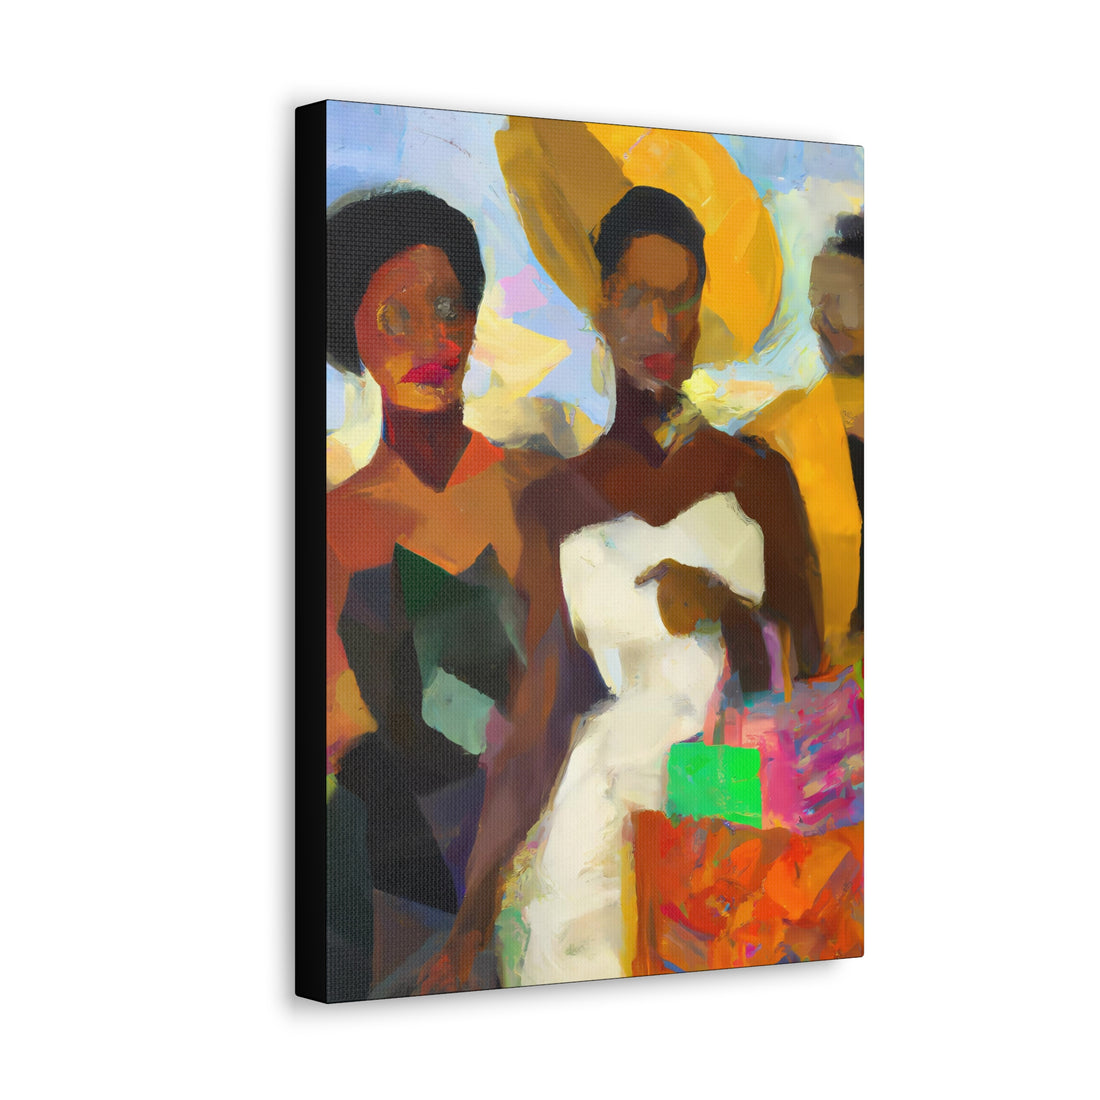 Lady in Cream, Shopping Lifestyle Series | Canvas Wall Art